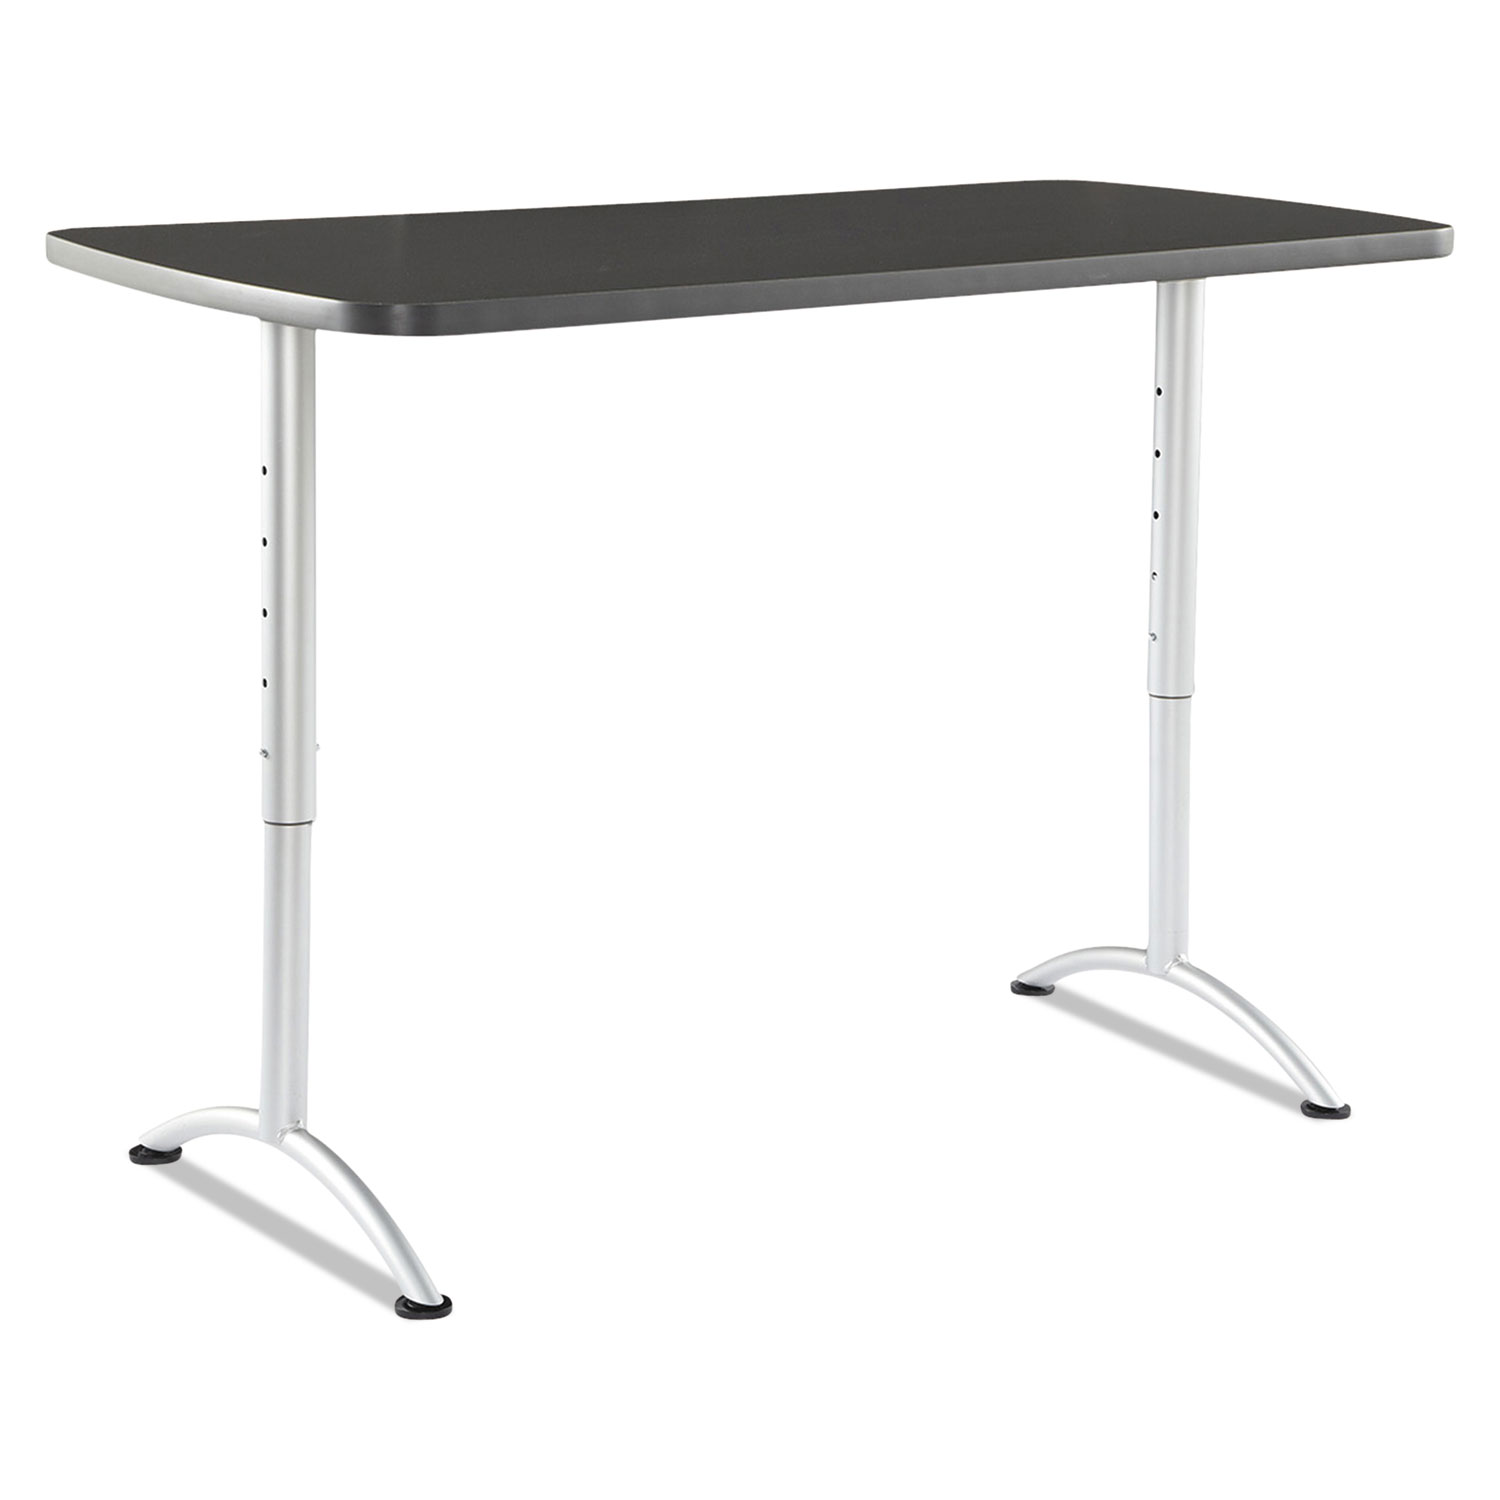  Iceberg 69317 ARC Sit-to-Stand Tables, Rectangular Top, 60w x 30d x 30-42h, Graphite/Silver (ICE69317) 